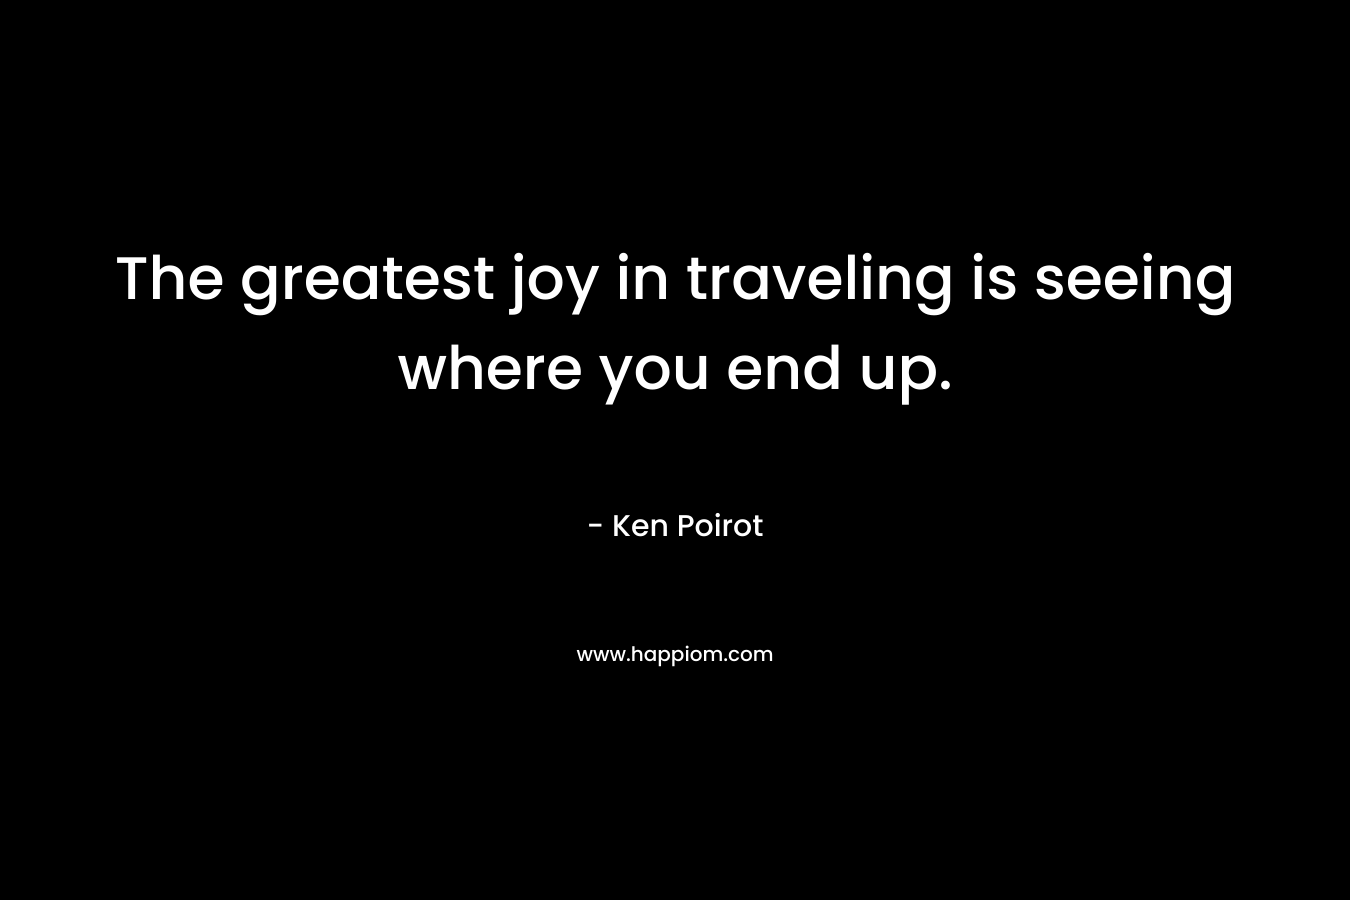 The greatest joy in traveling is seeing where you end up.